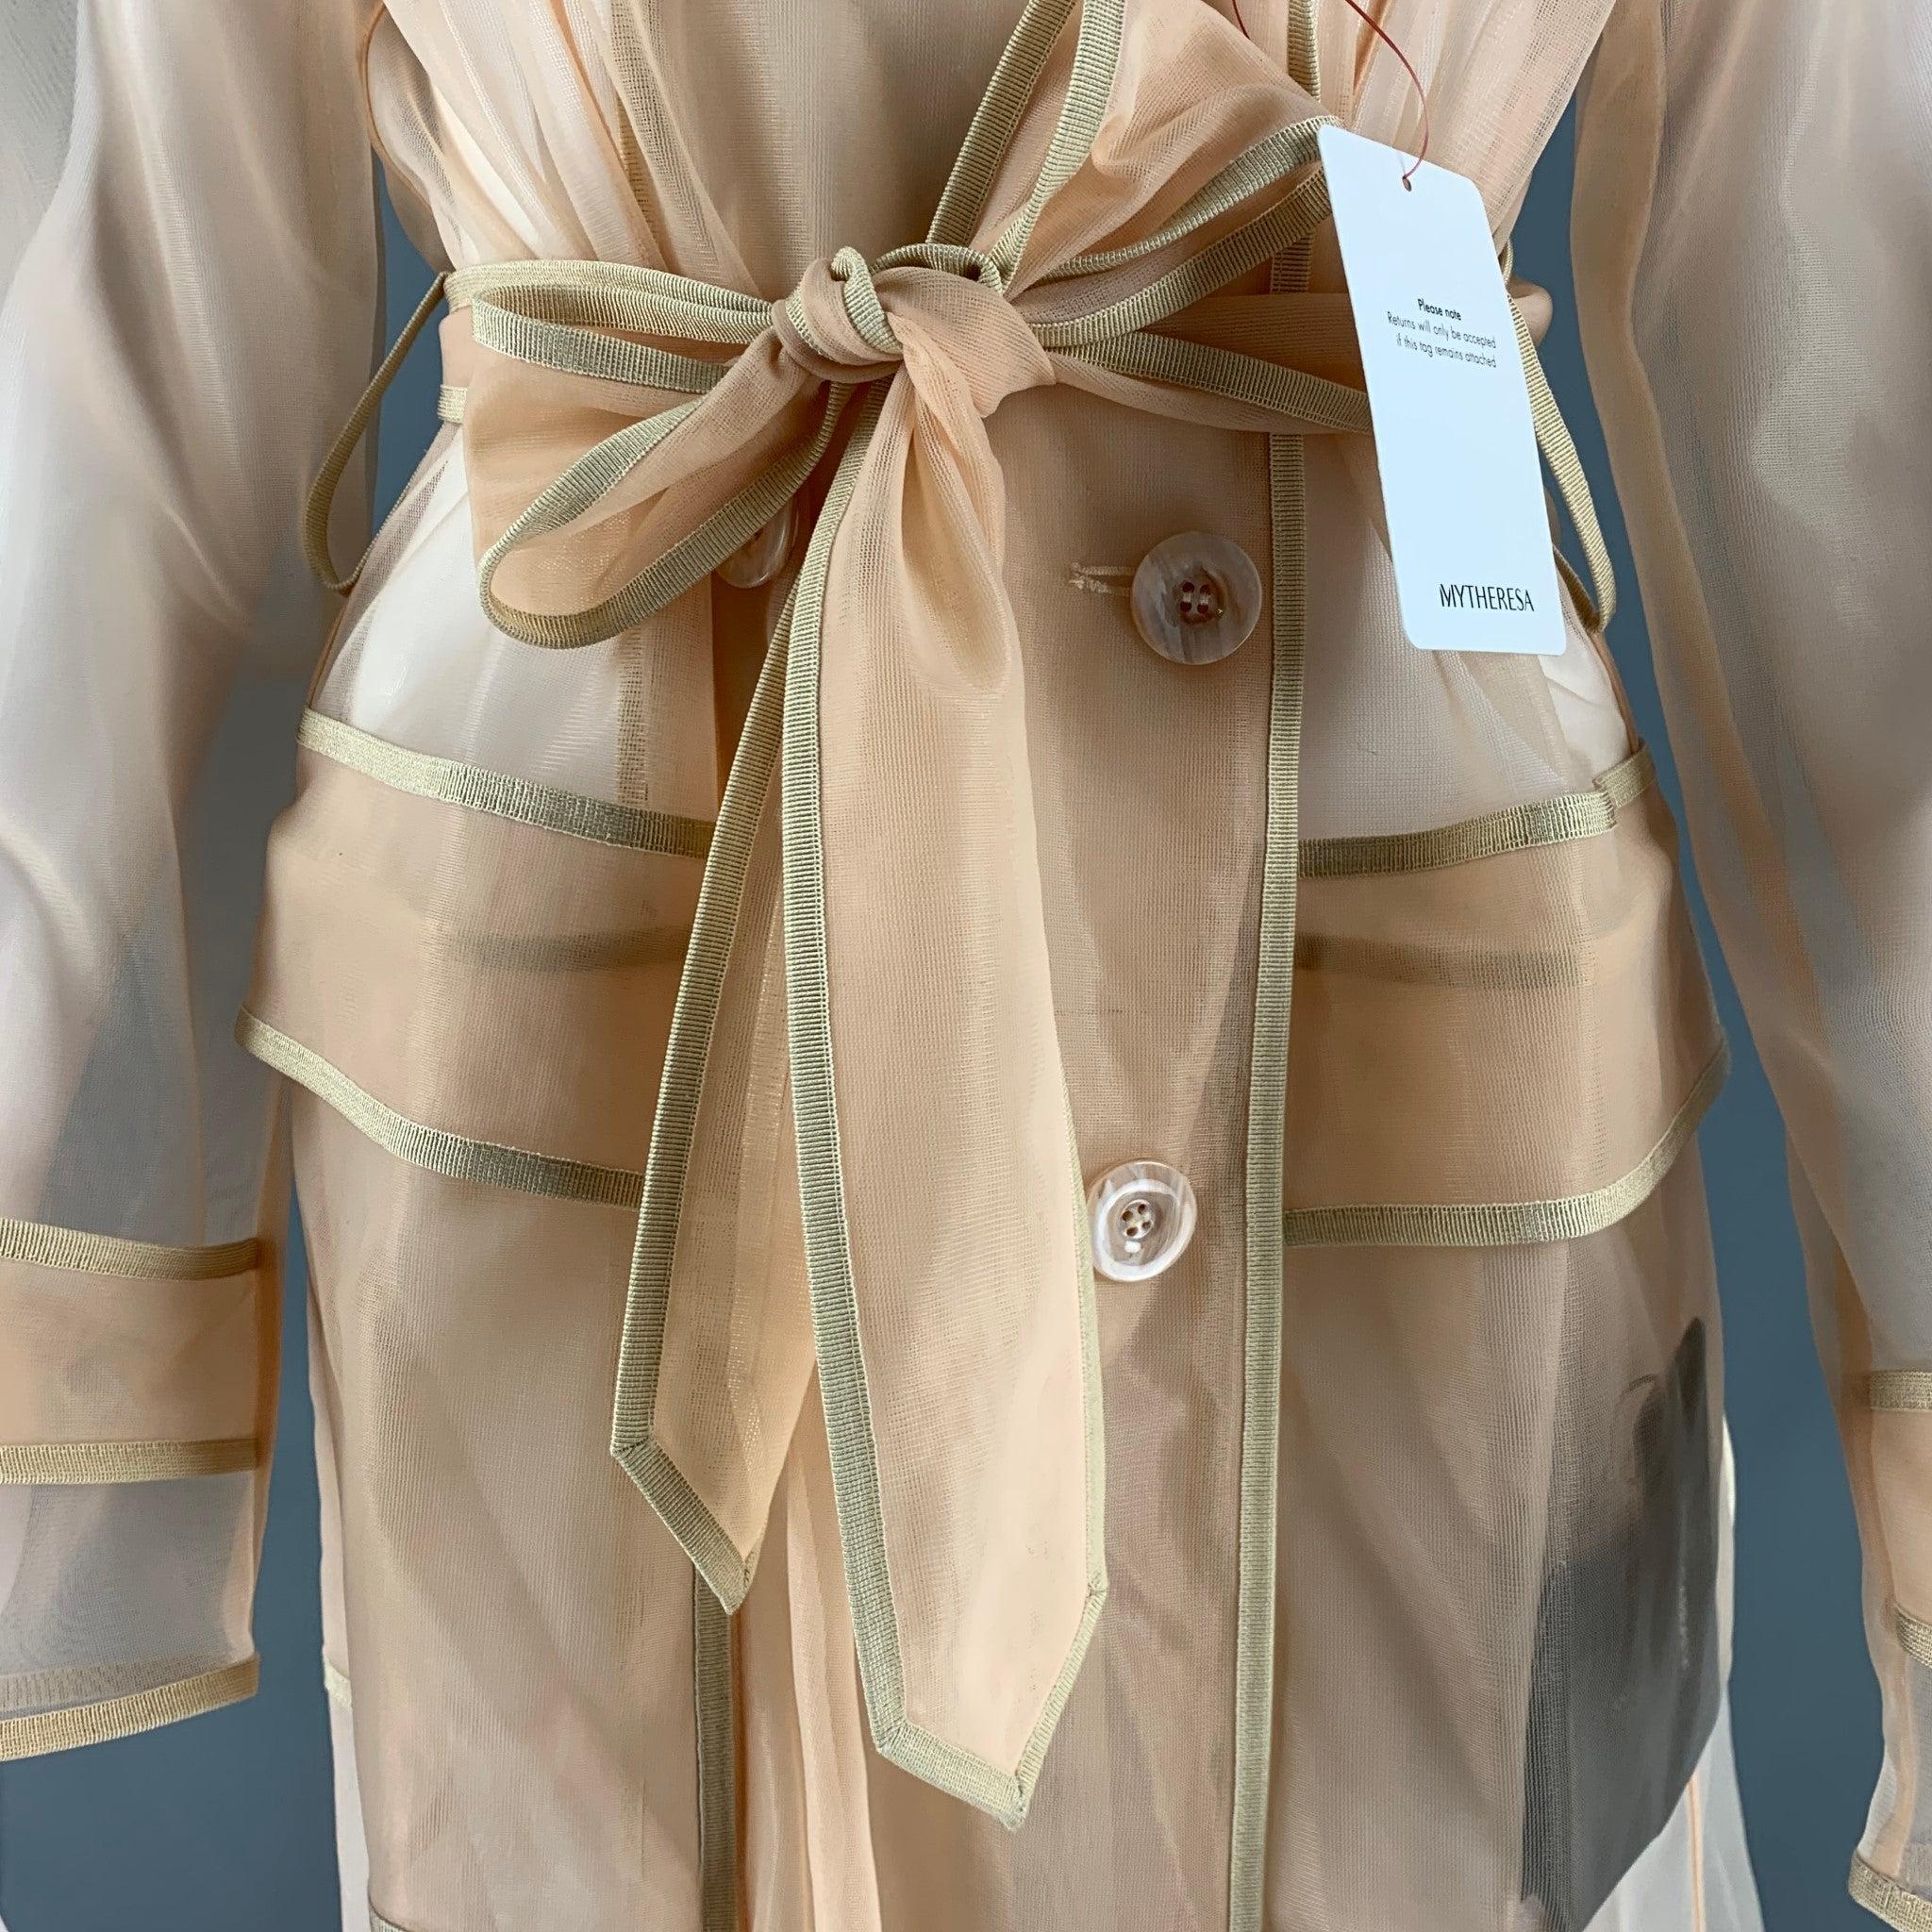 DOLCE & GABBANA KIM Tech Marquisette trench coat comes in a beige polyamide blend mesh material featuring a belted style, see through look, double breasted, and front pockets. Made in Italy.Excellent Pre-Owned Condition.  

Marked:   38